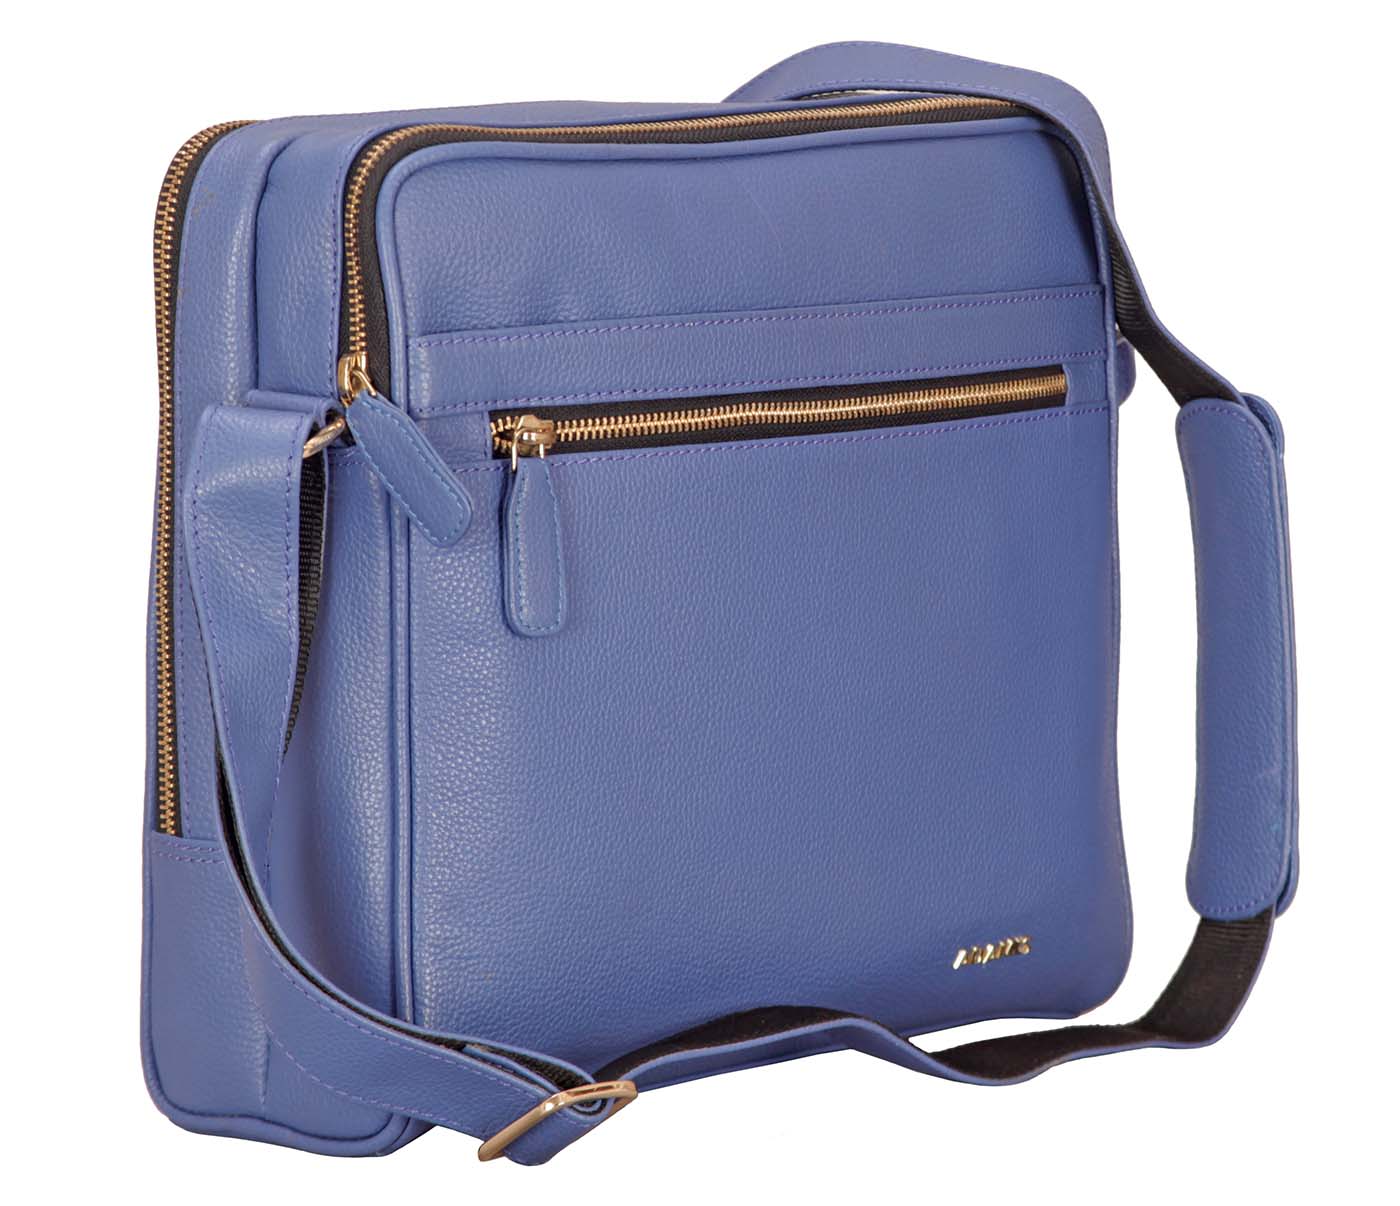 P37-Dwayne-Men's travel pouch in Genuine Leather - Blue